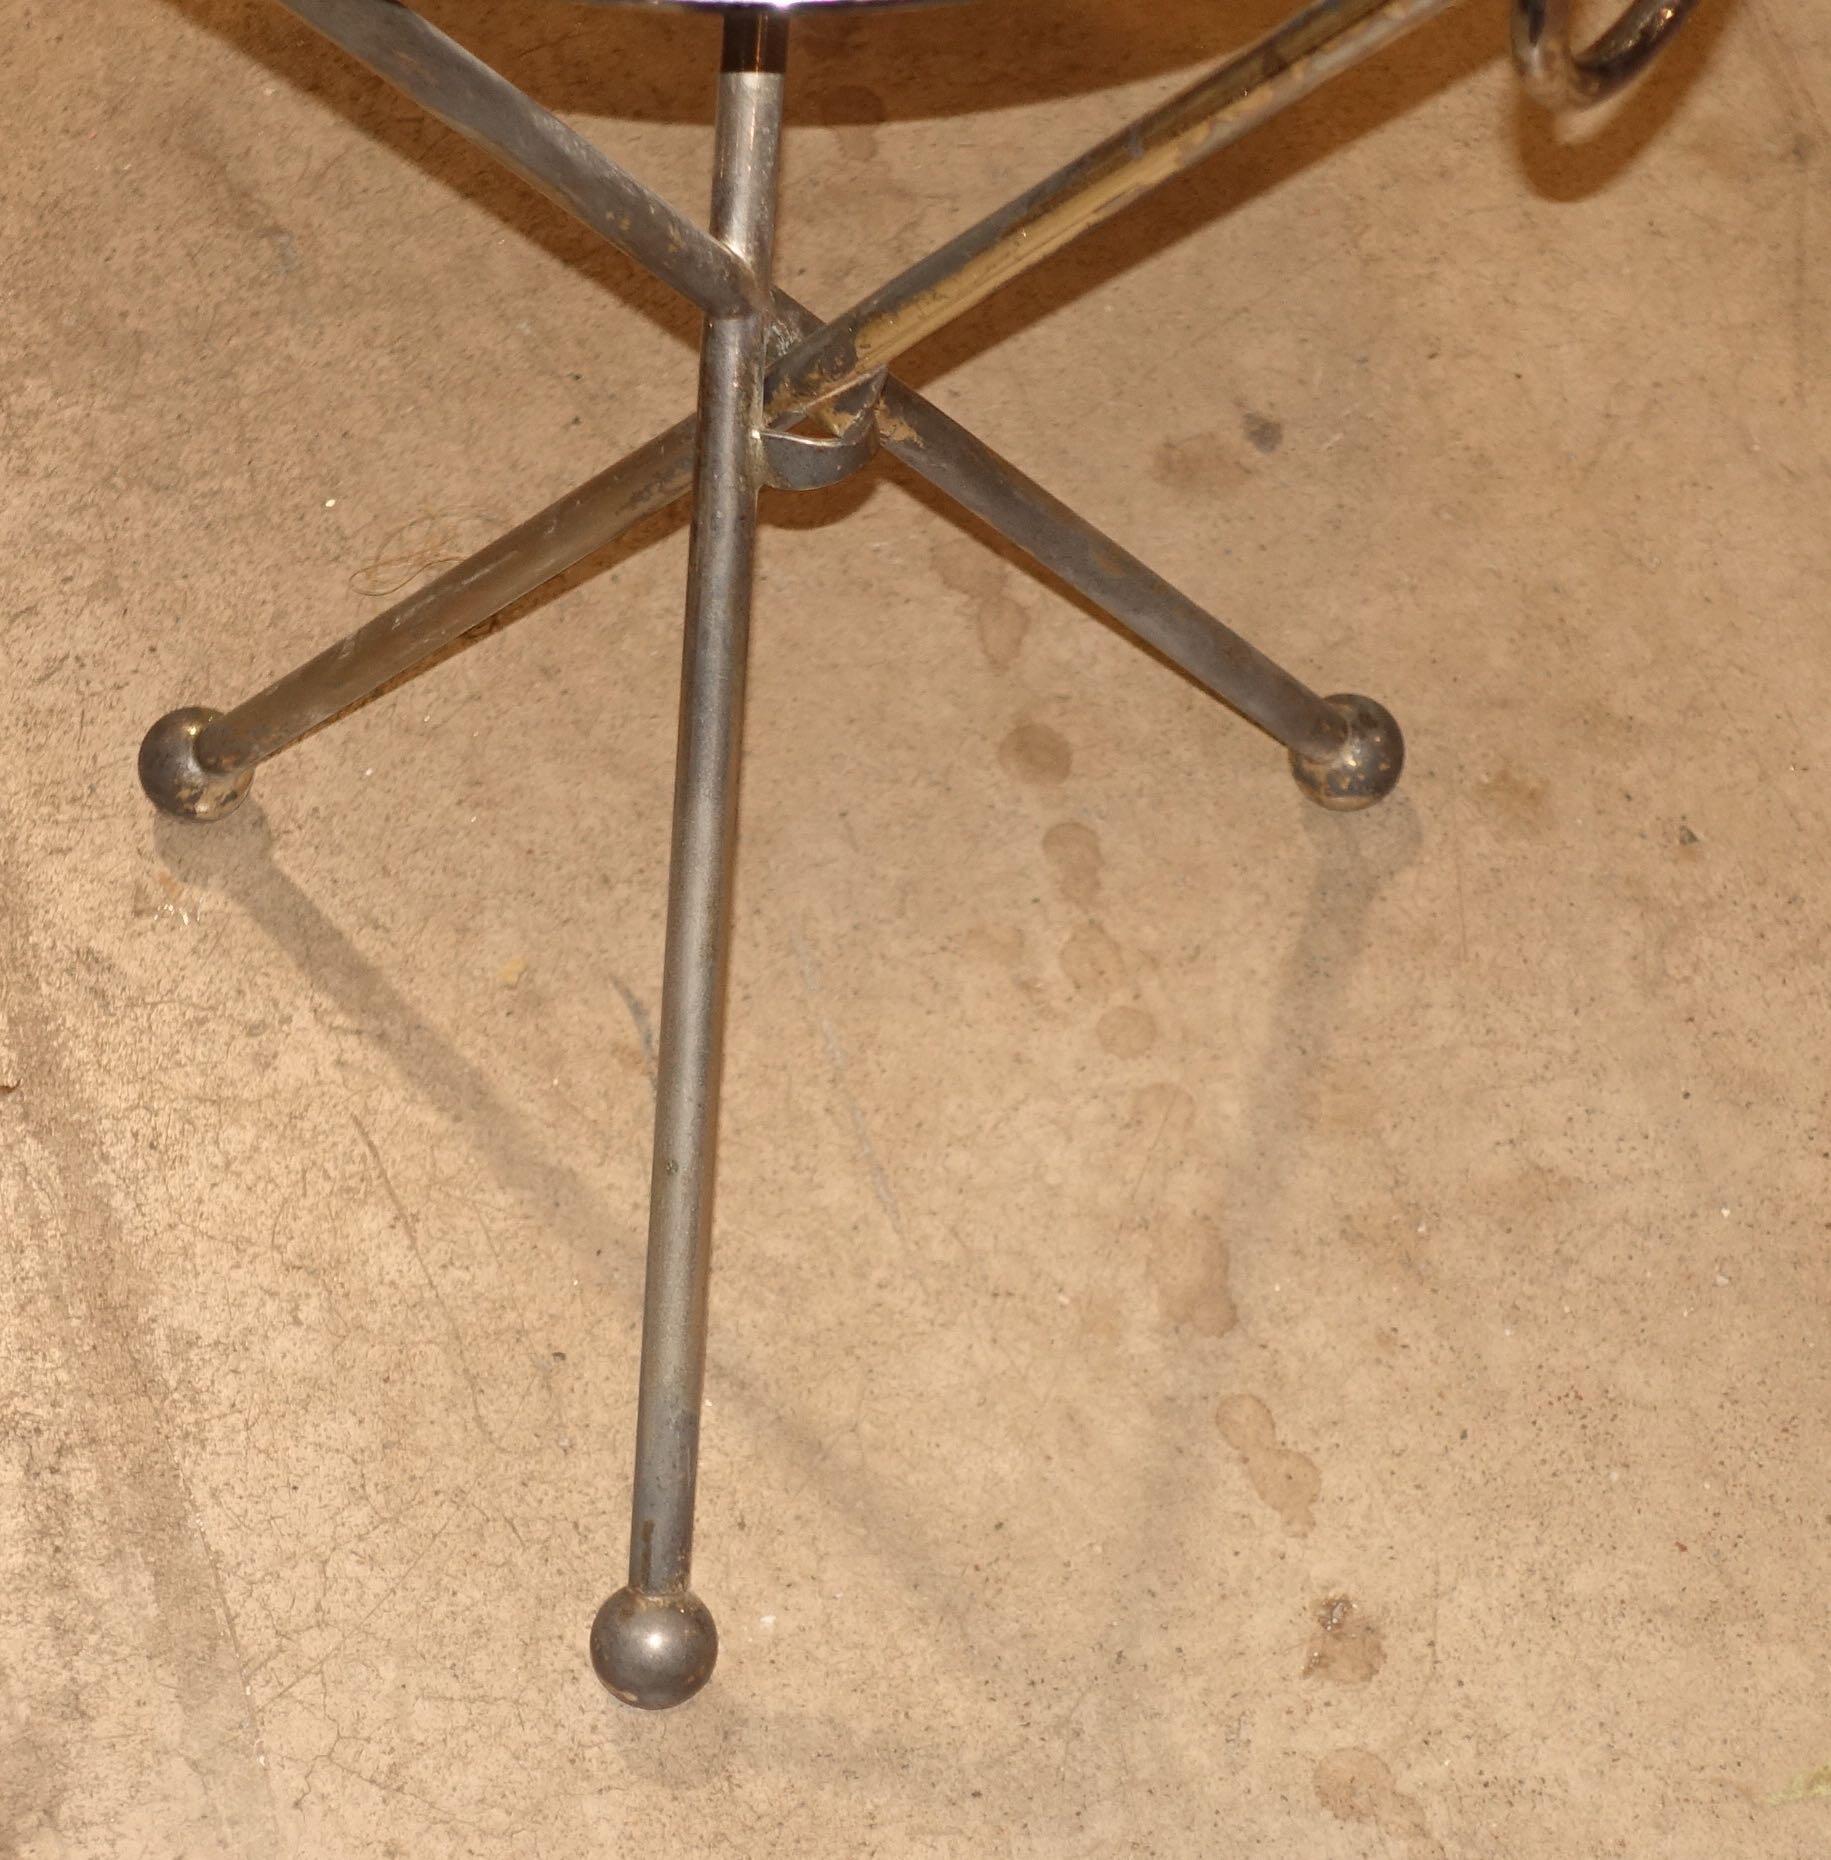 Midcentury Spanish silver plate folding cocktail table
Tripod legs with footed ball detail
Lightweight and sturdy and easy to relocate in a room
Beautiful natural patina.